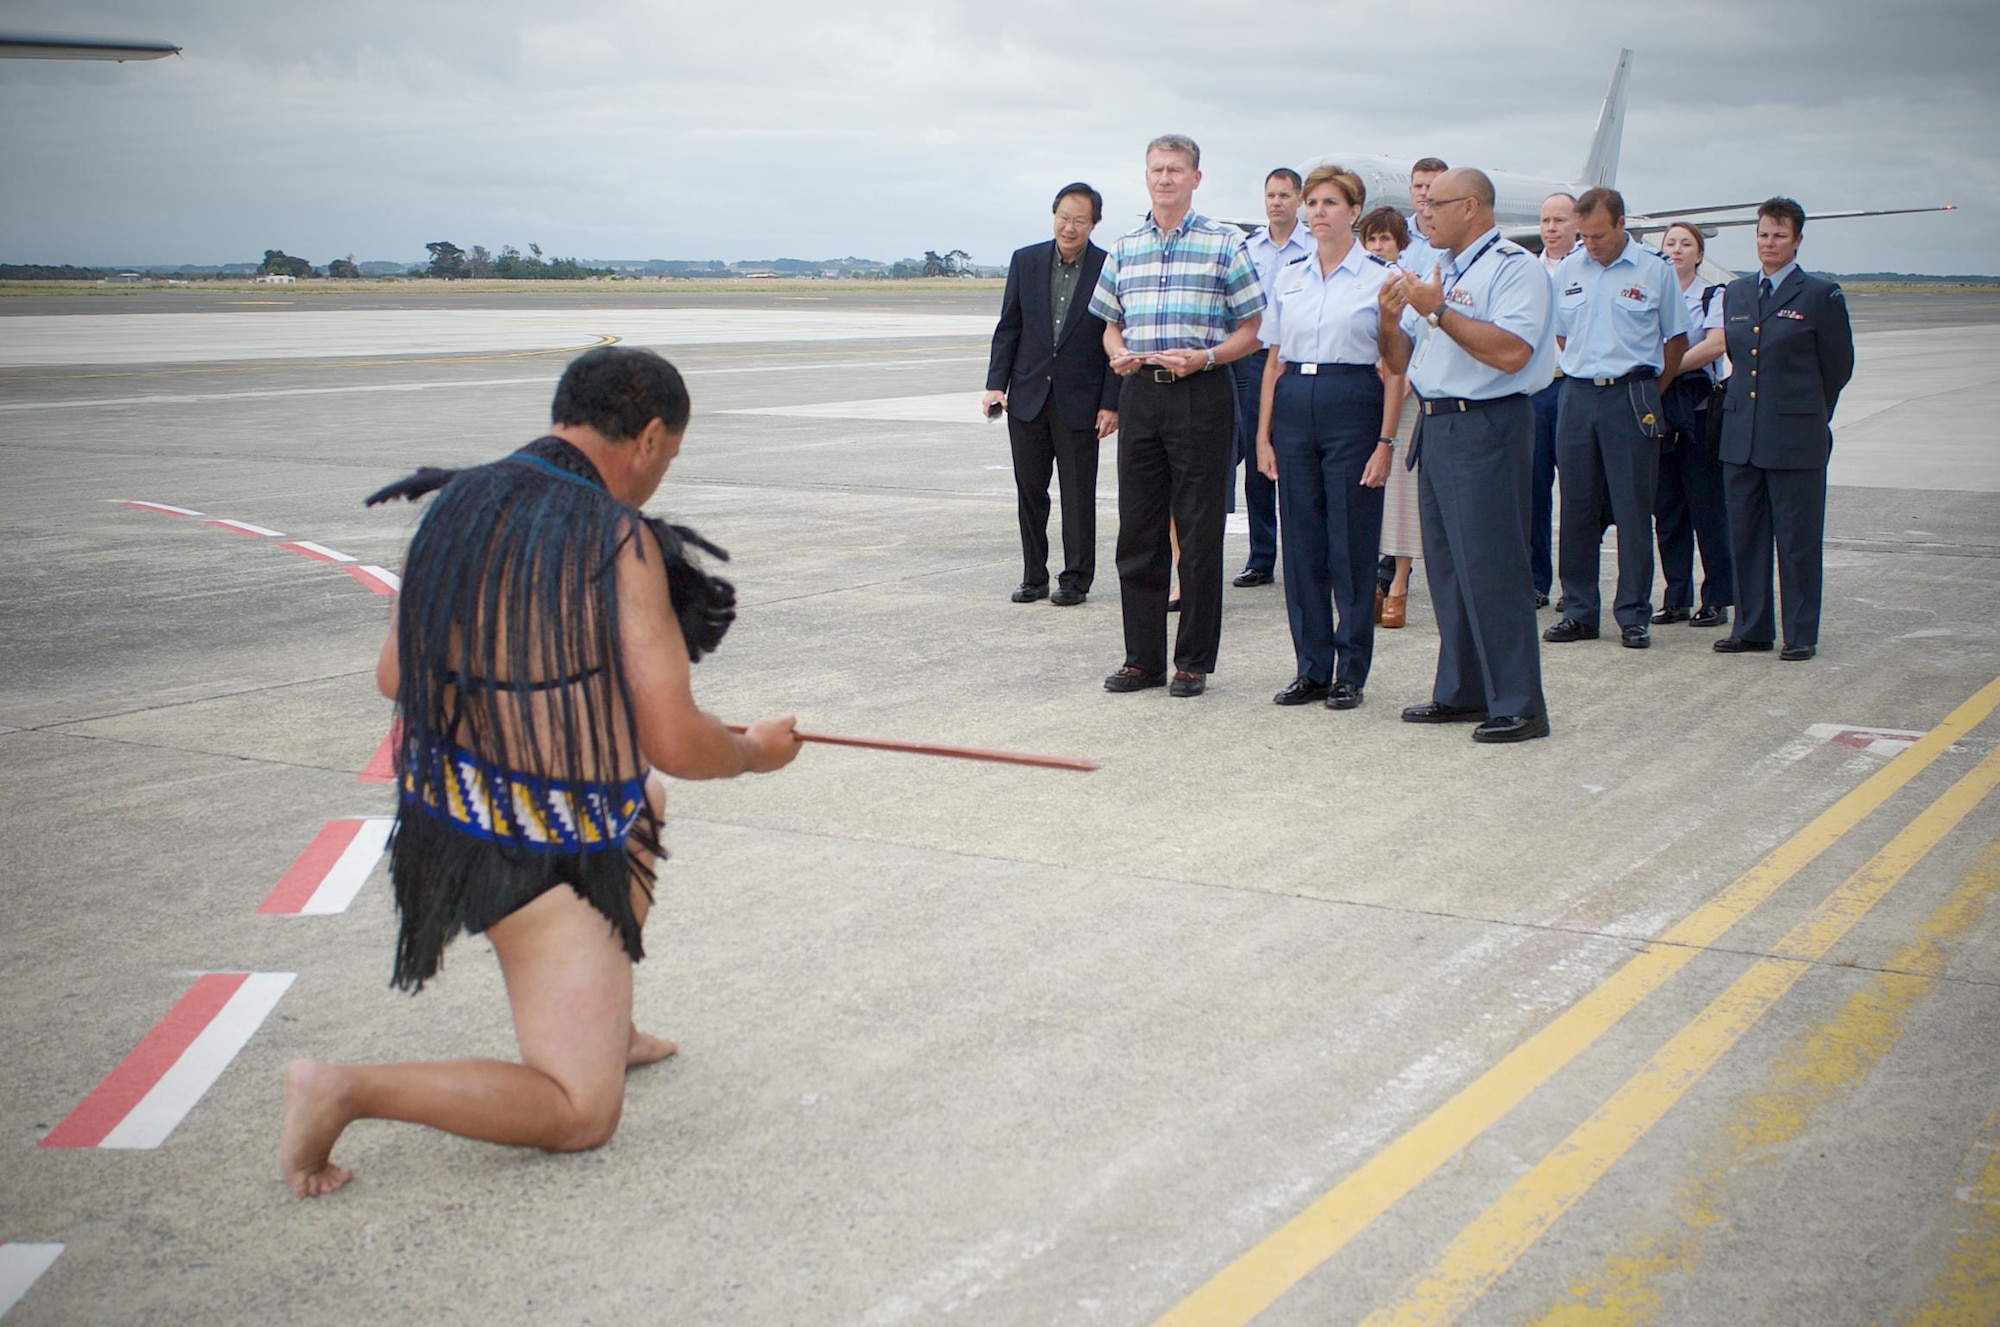 Gen. Lori Robinson, Pacific Air Forces commander, and a delegation from Pacific Air Forces, looks on as Royal New Zealand Air Force Base Ohakea Maori cultural advisor, Warrant Officer P.J. Smith, explains the traditional Powhiri warrior ceremony upon her arrival at the base, March 4, 2016.  Robinson visited RNZAF veterans and gave remarks at the 75 Years of Women in Service celebration. The visit to RNZAF Base Ohakea was part of Robinson’s two-week visit to New Zealand and Australia, which served to improve relations with both nations and reaffirmed PACAF’s commitment to the rebalance in the Pacific. (Photo courtesy of RNZAF)